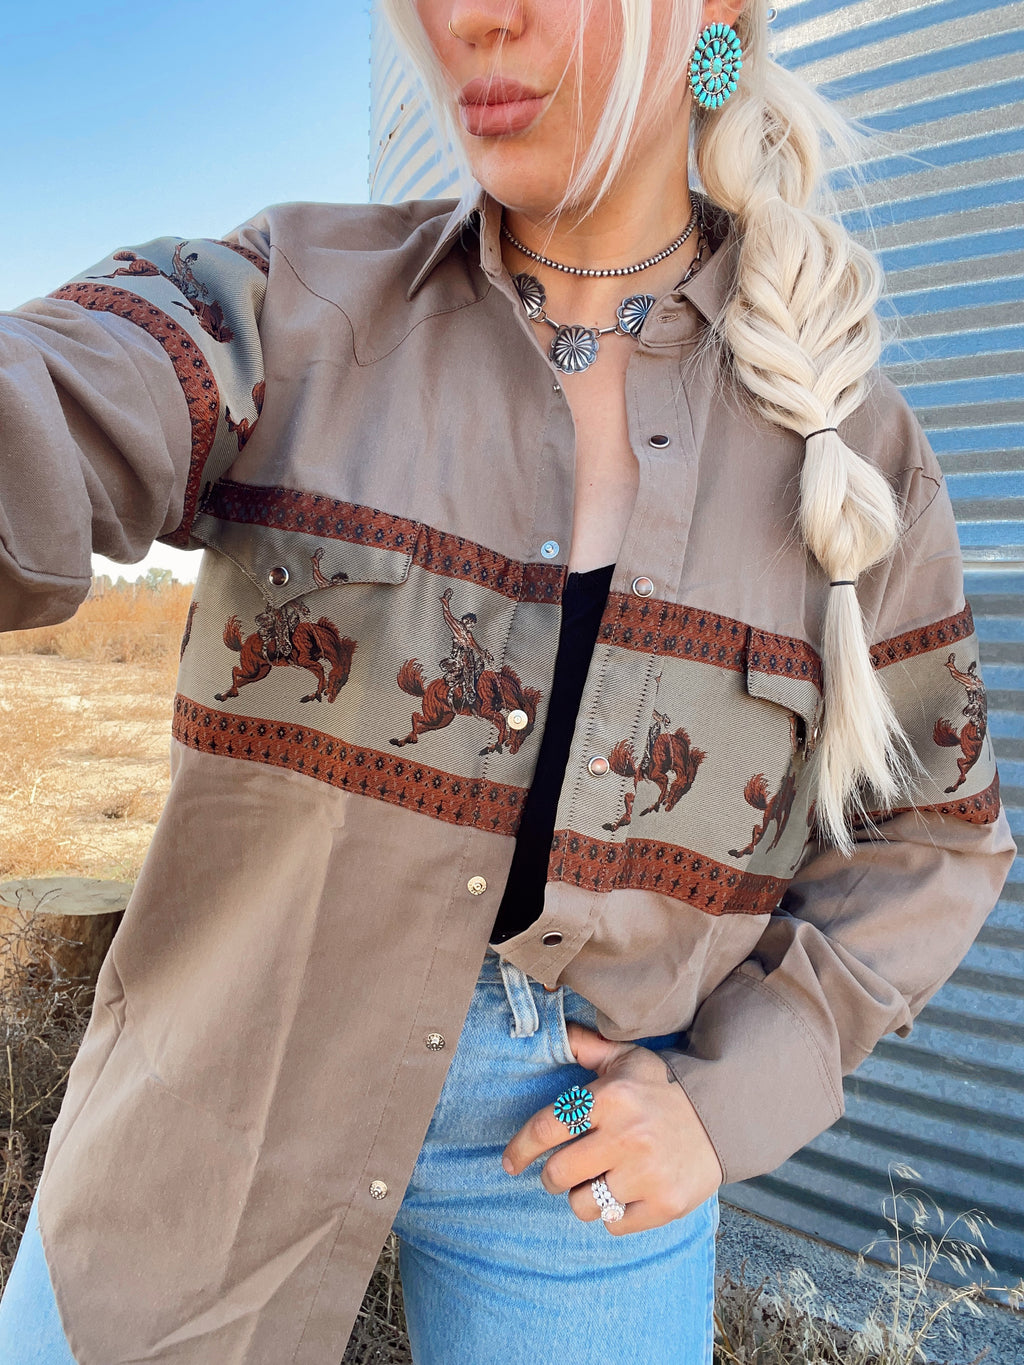 Traditional Pearl Snaps – The Buckskin Babes